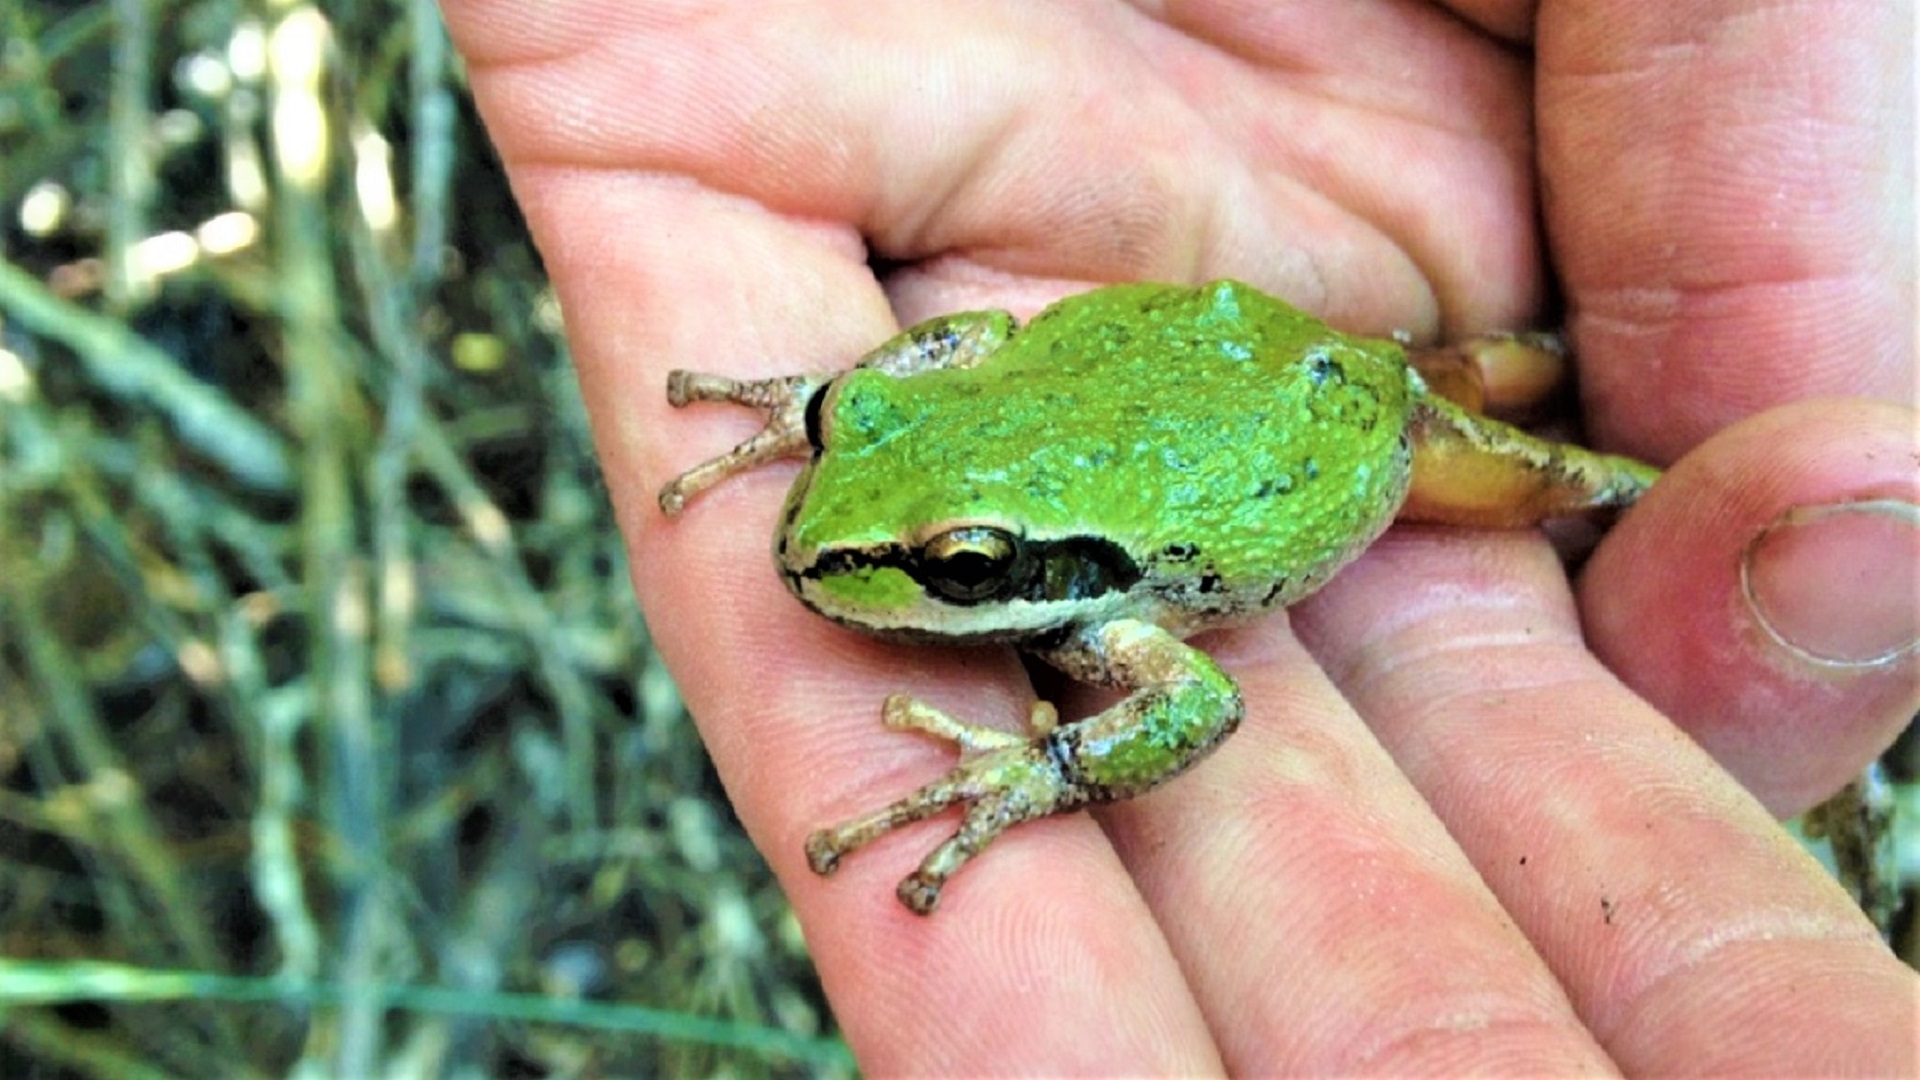 A small green frog in someone’s hands